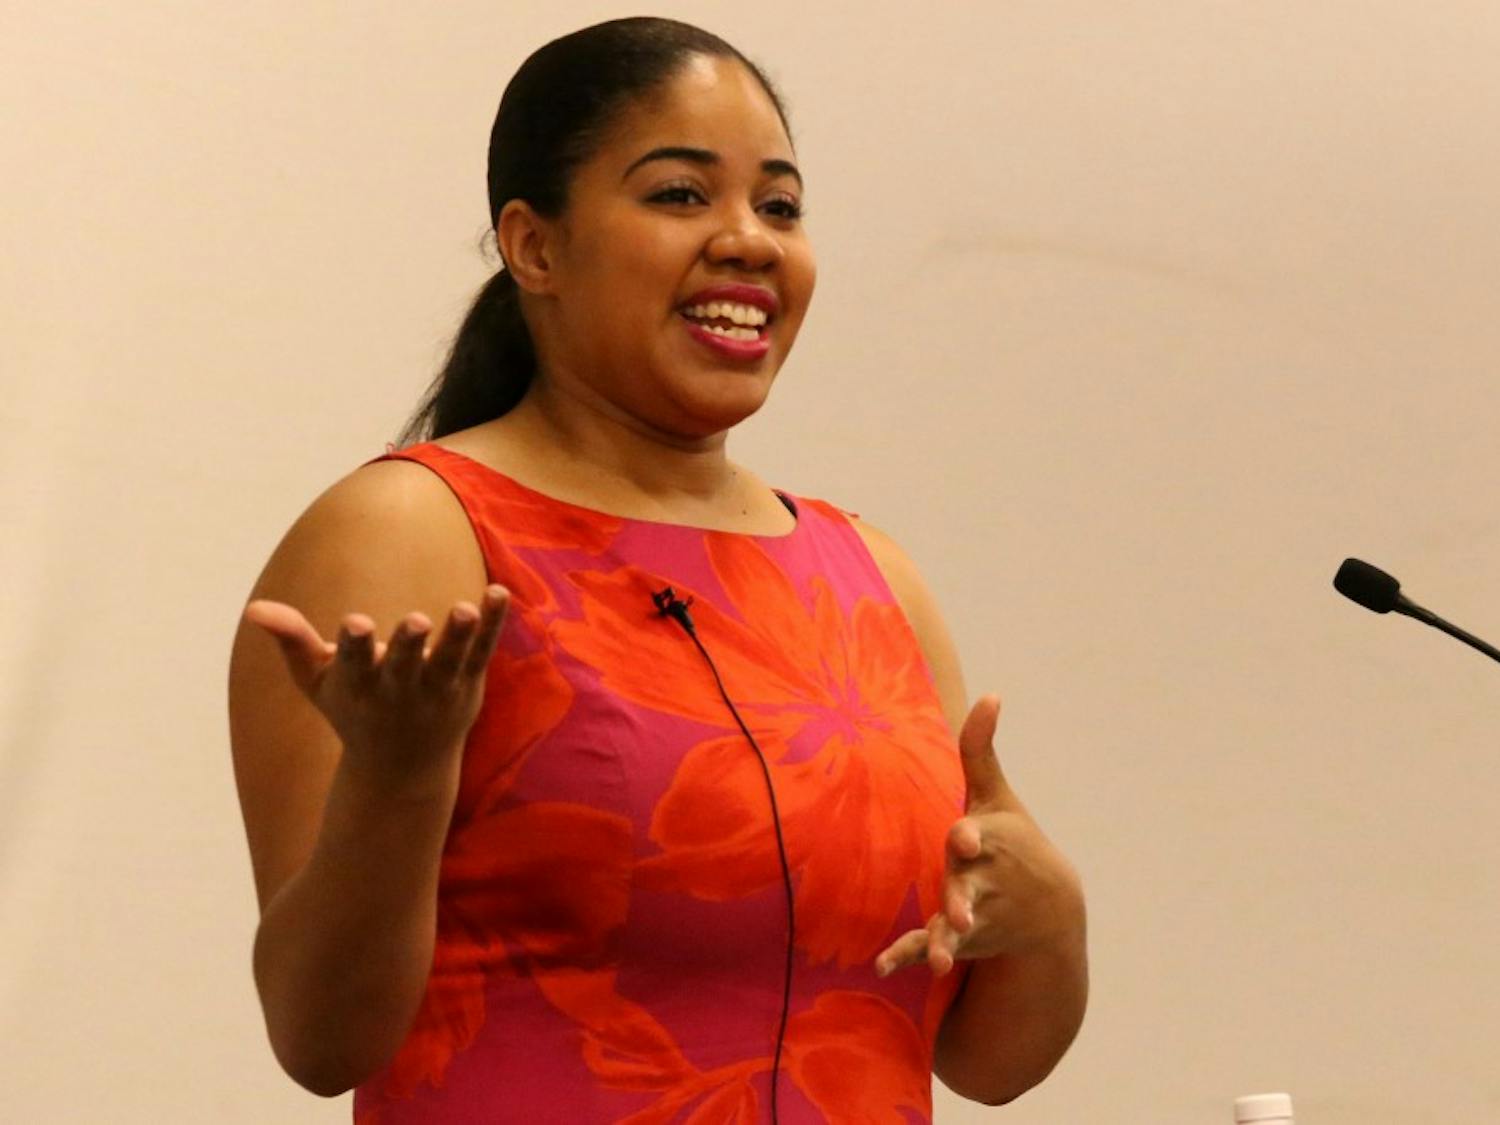 Candace Mitchell,&nbsp;co-founder and CEO of Techturized, spoke to students in the Turquiose Room of the Memorial Union on the Tempe campus on Tuesday, March 22, 2016, as part of the Fulton School’s WomYn EmPOWERment lecture series.&nbsp;